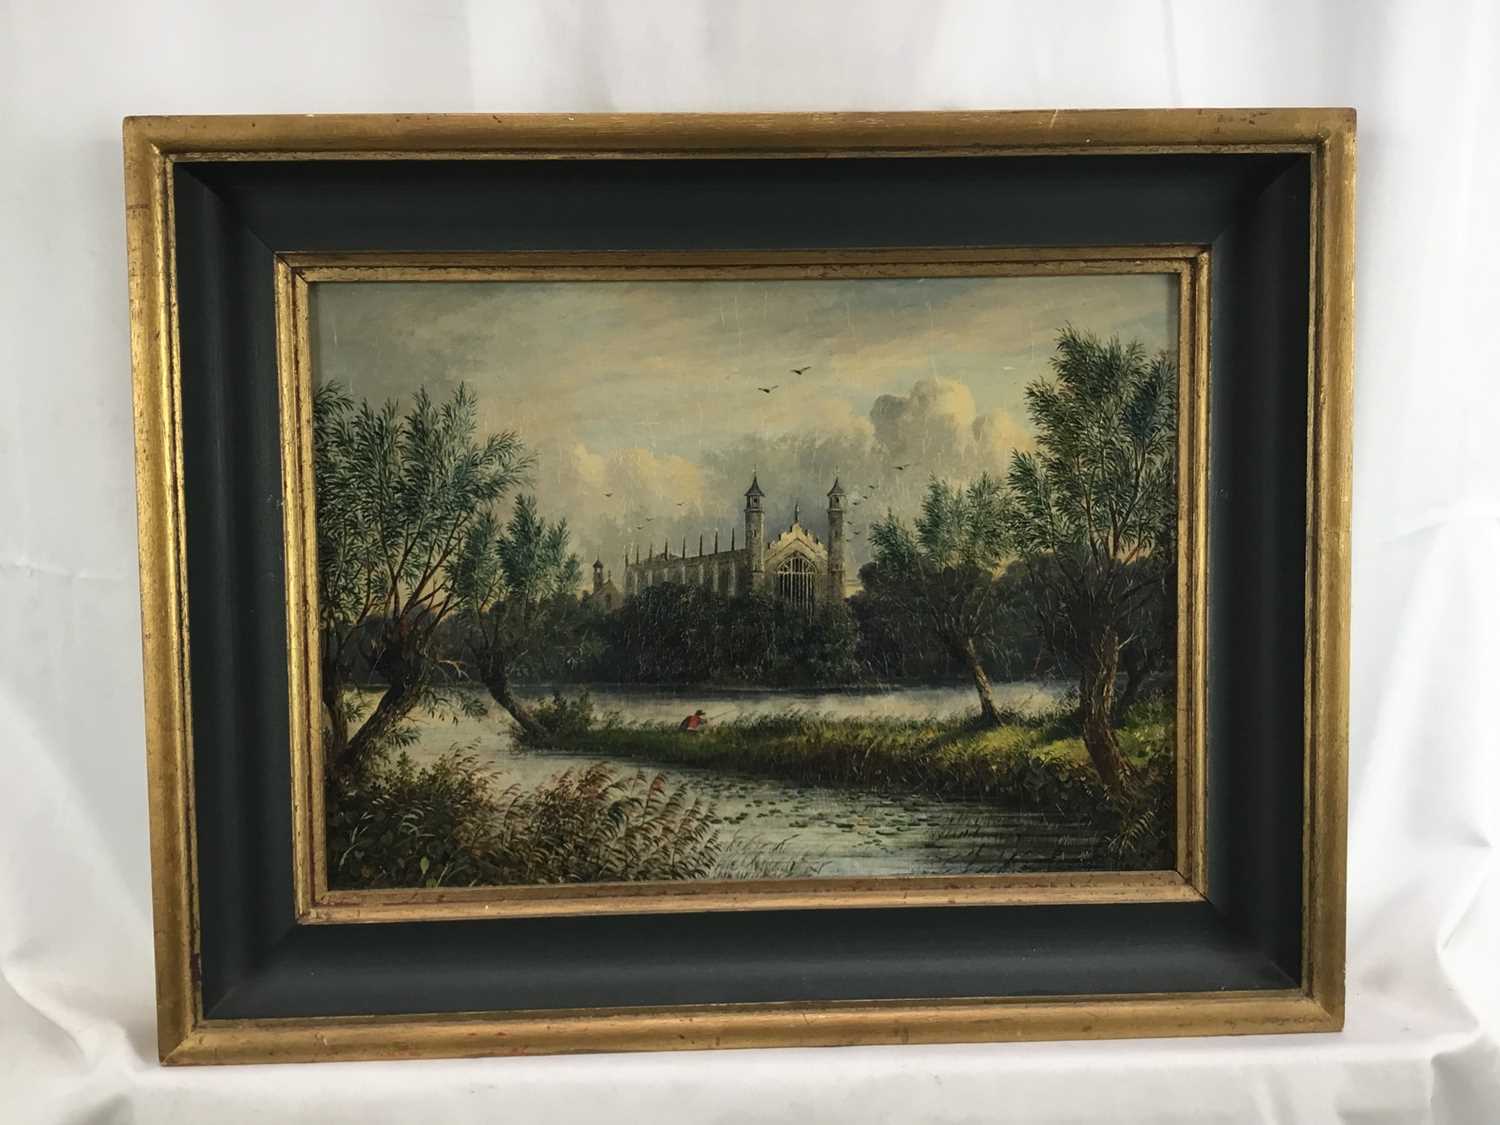 19th century English School, oil on canvas - view of Eton from the river - Image 2 of 4